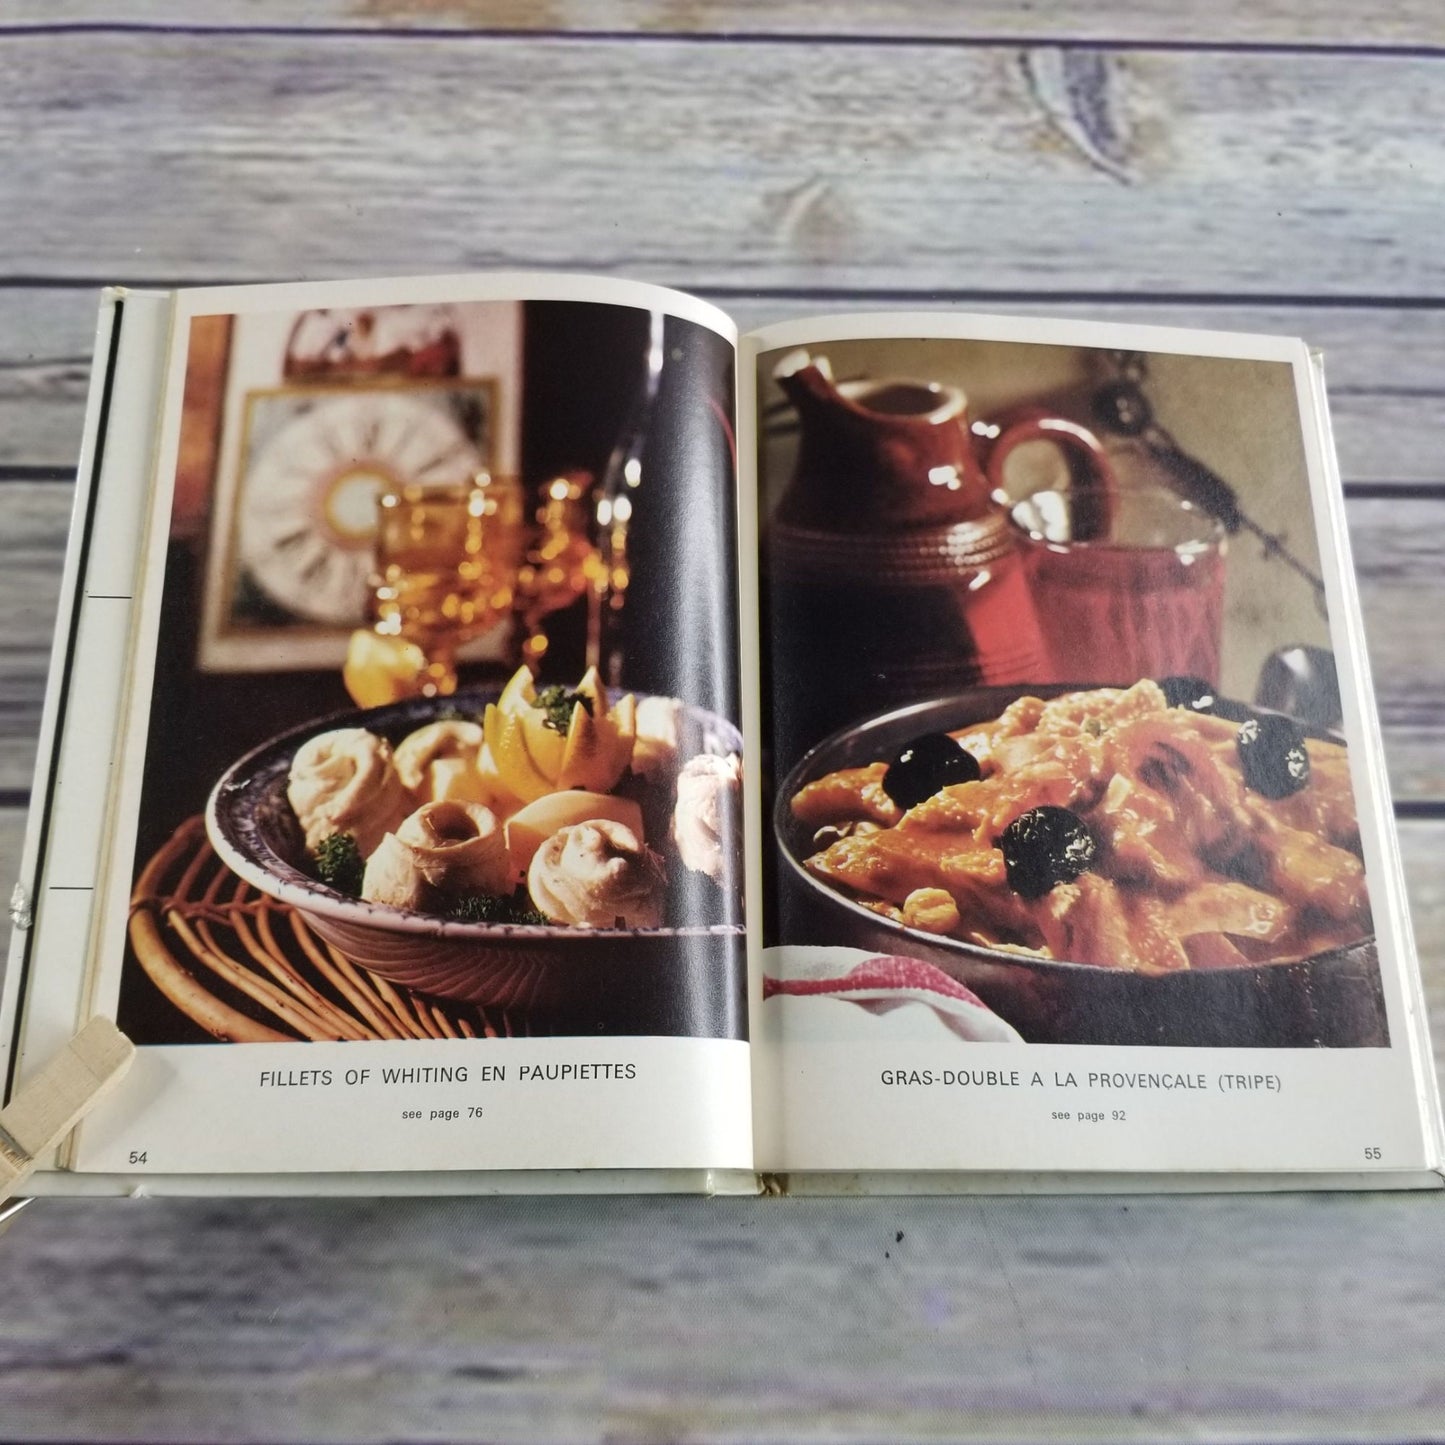 Vintage Cookbook French Cooking SEB Pressure Cooker Recipes and Instructions 1970s Manual Hardcover